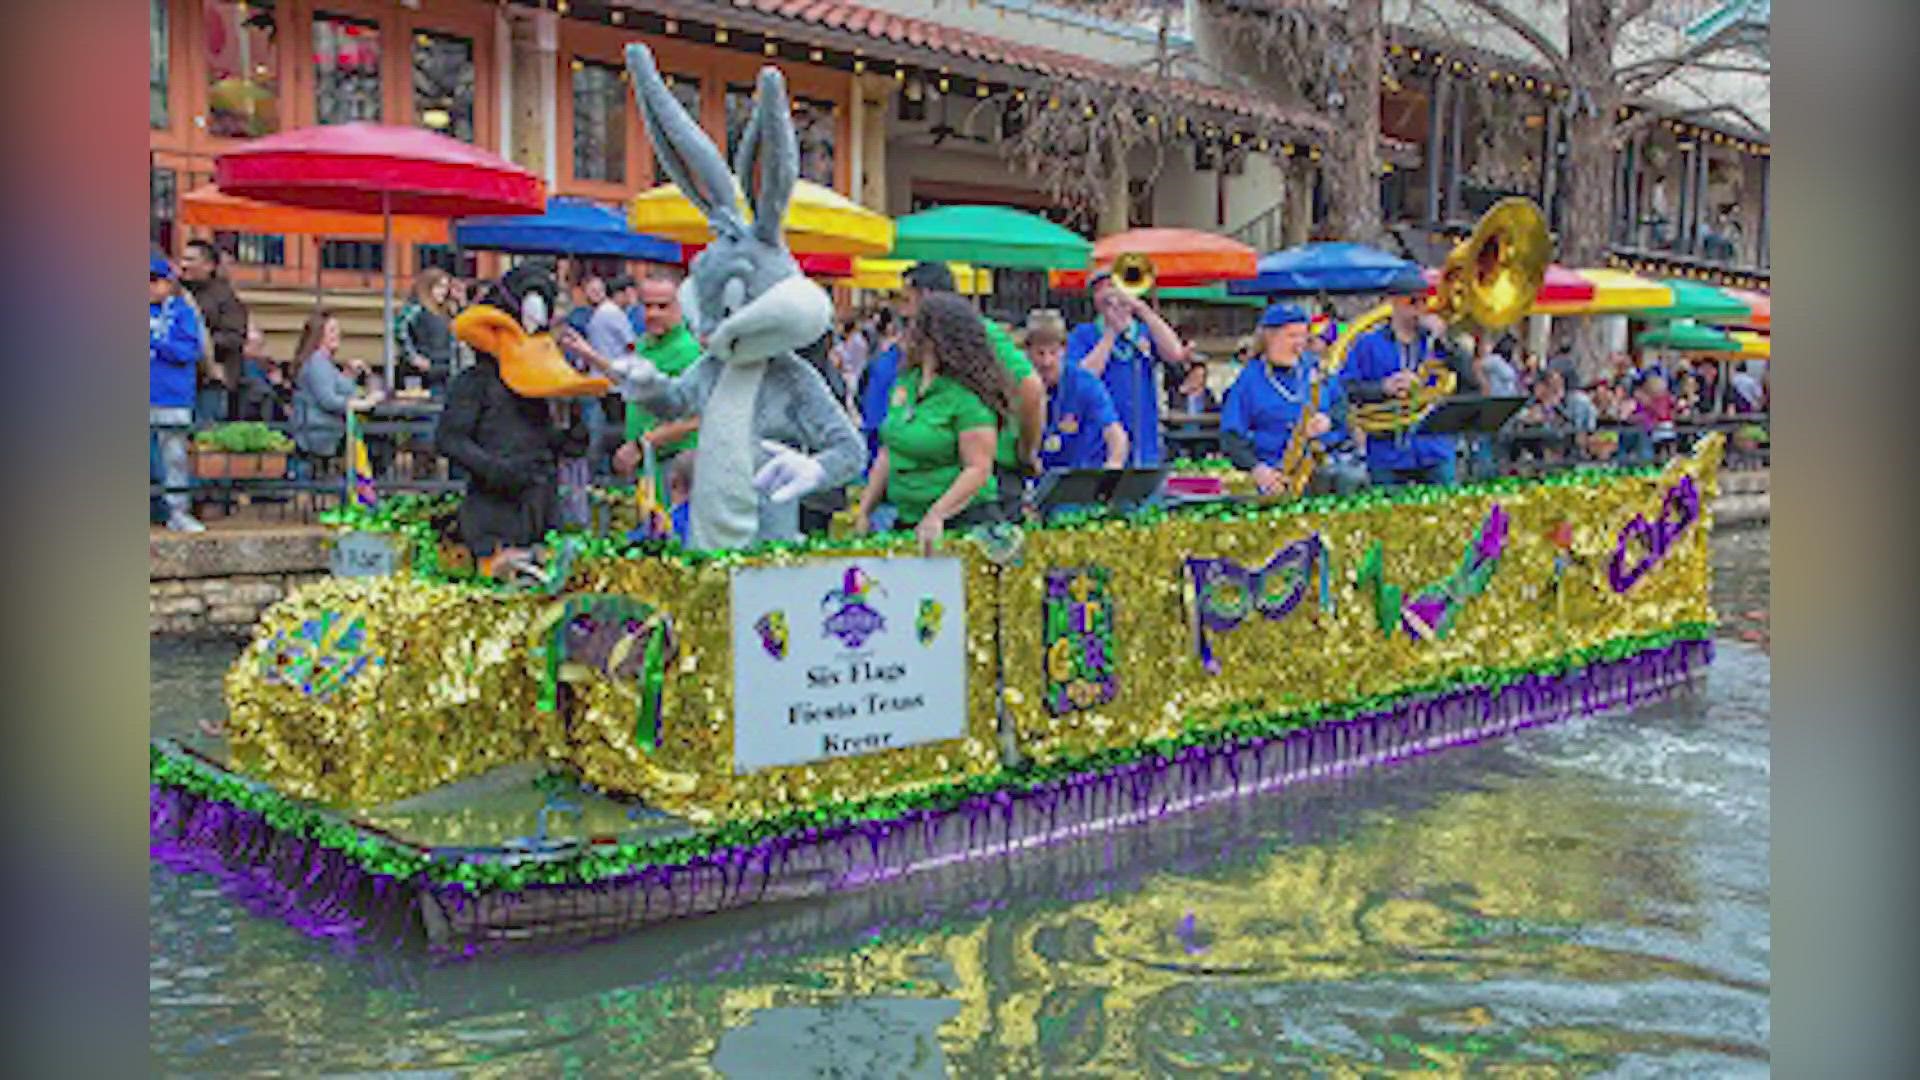 It's time to break out the beads because folks can celebrate Mardi Gras in the Alamo City.